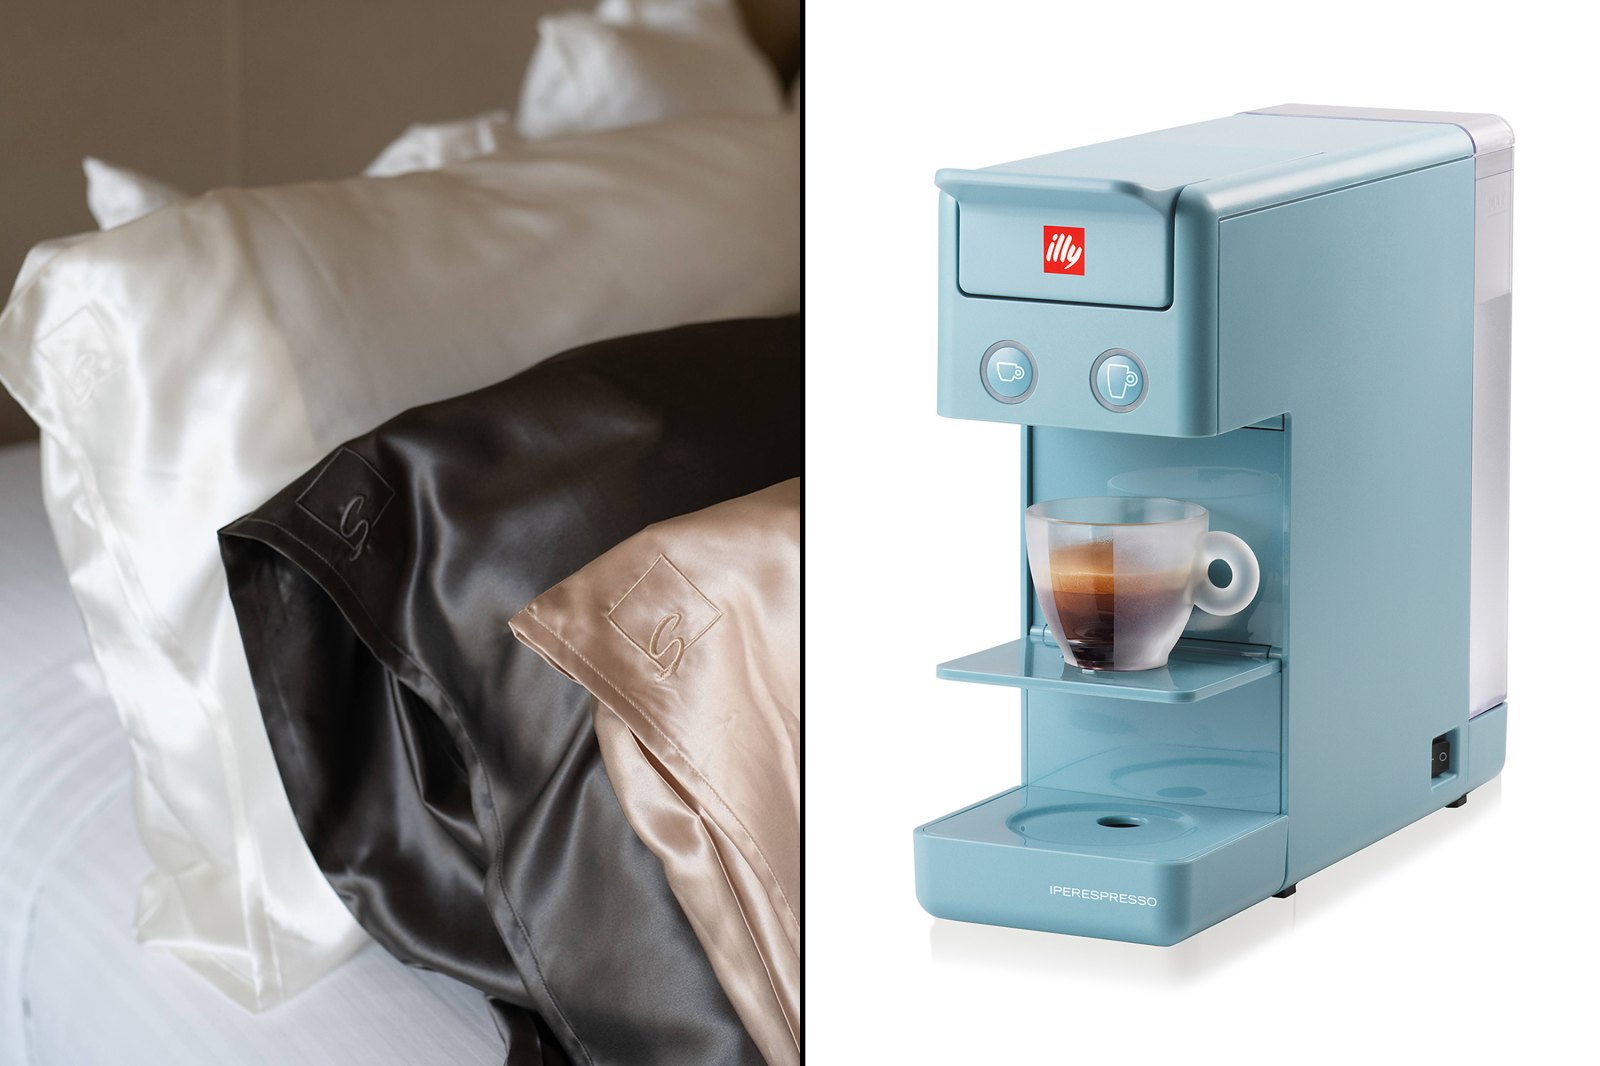 Silk Pillows Espresso Machines The Best Buys for Moms This Holiday Season